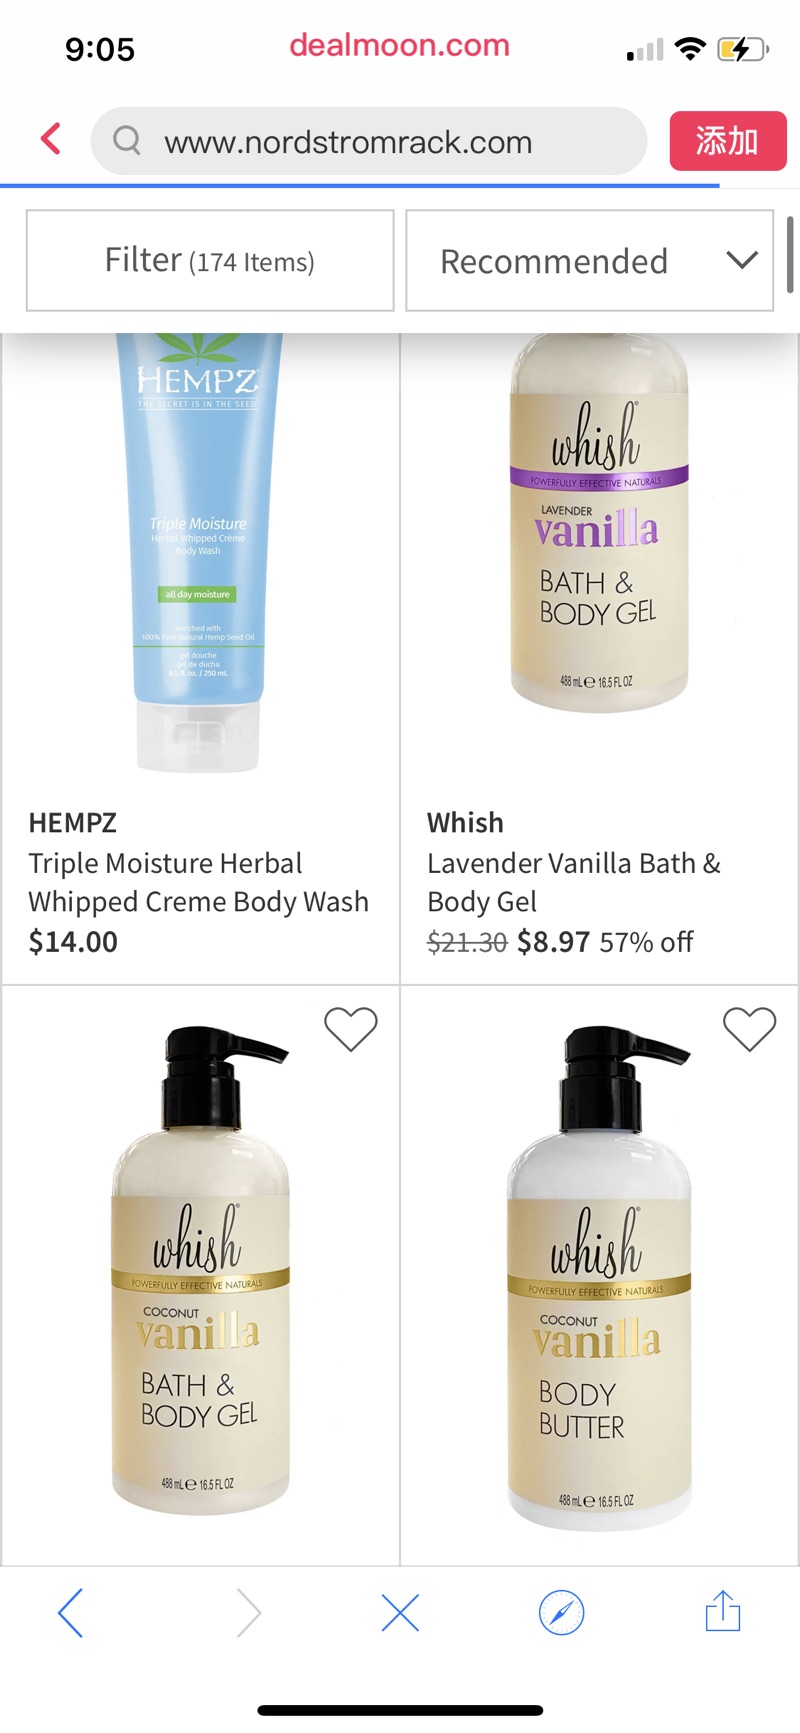 Luxurious Body Creams, Scrubs & More Up to 60% Off低至2折